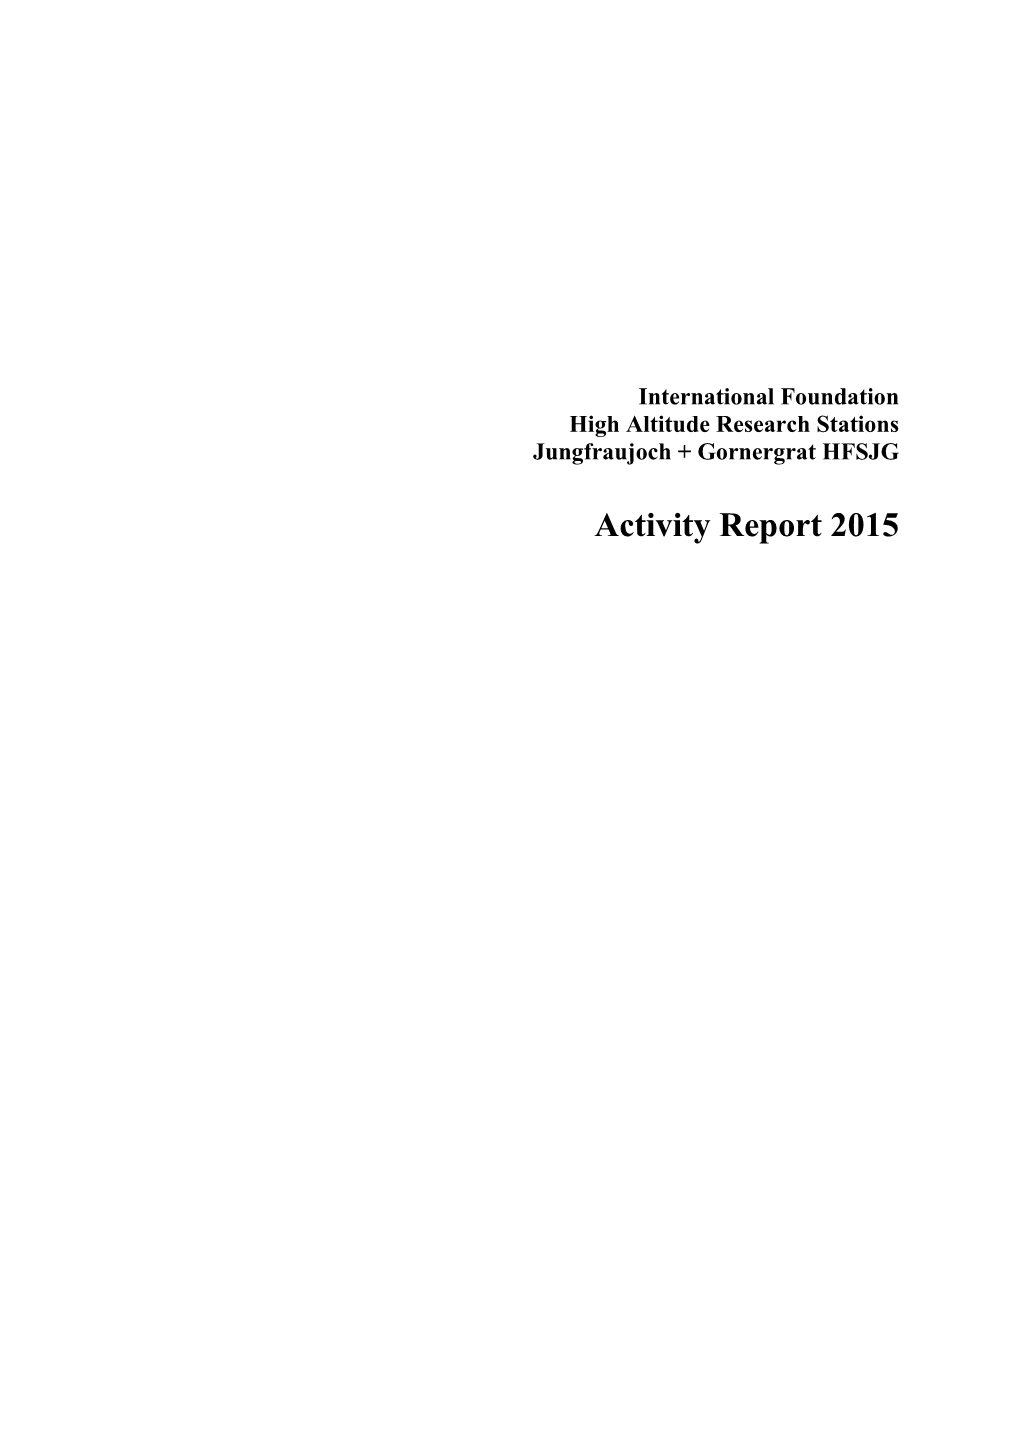 The Entire Activity Report 2015 for Download